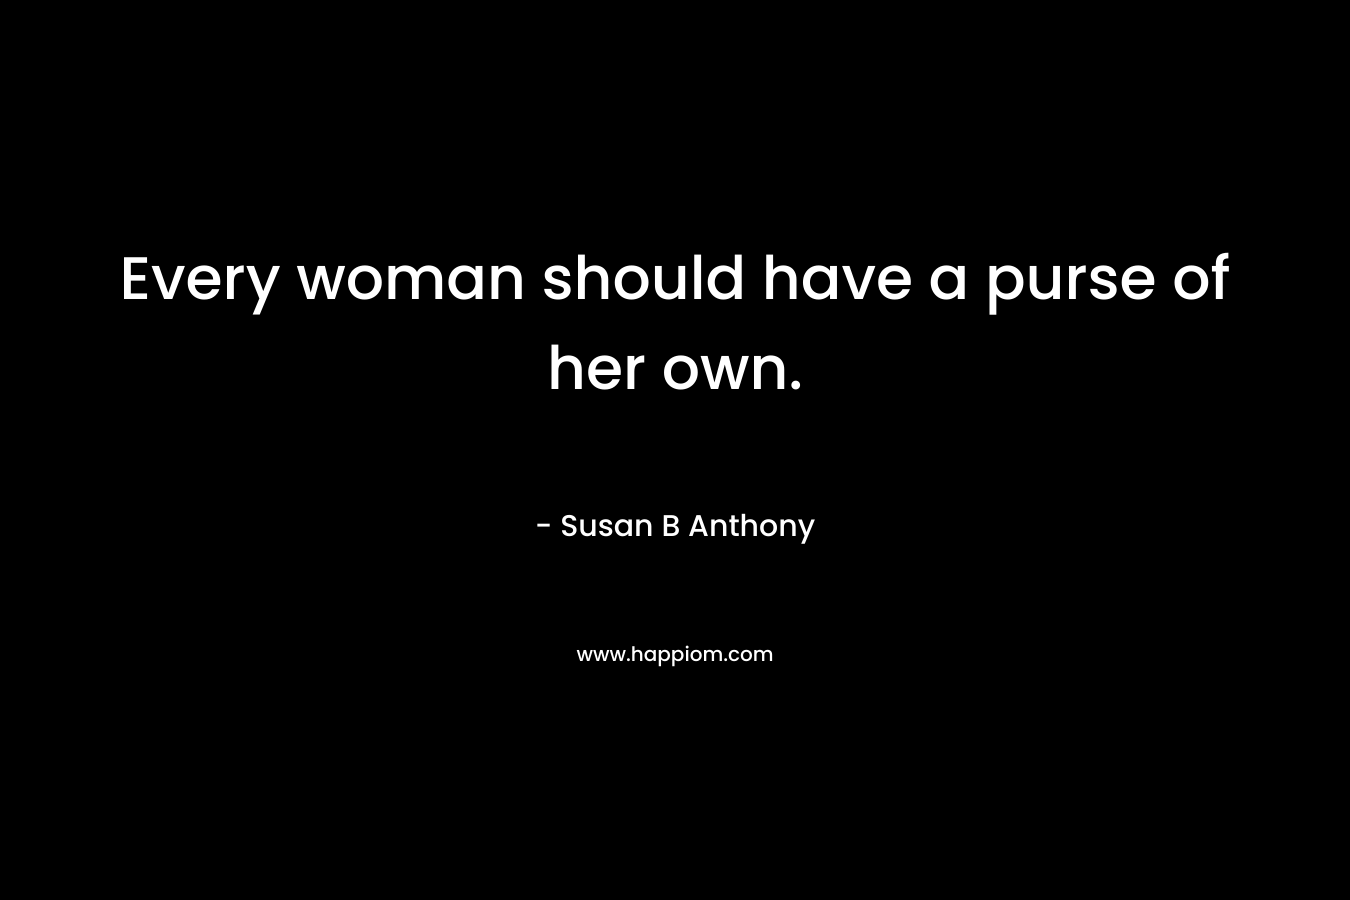 Every woman should have a purse of her own. – Susan B Anthony